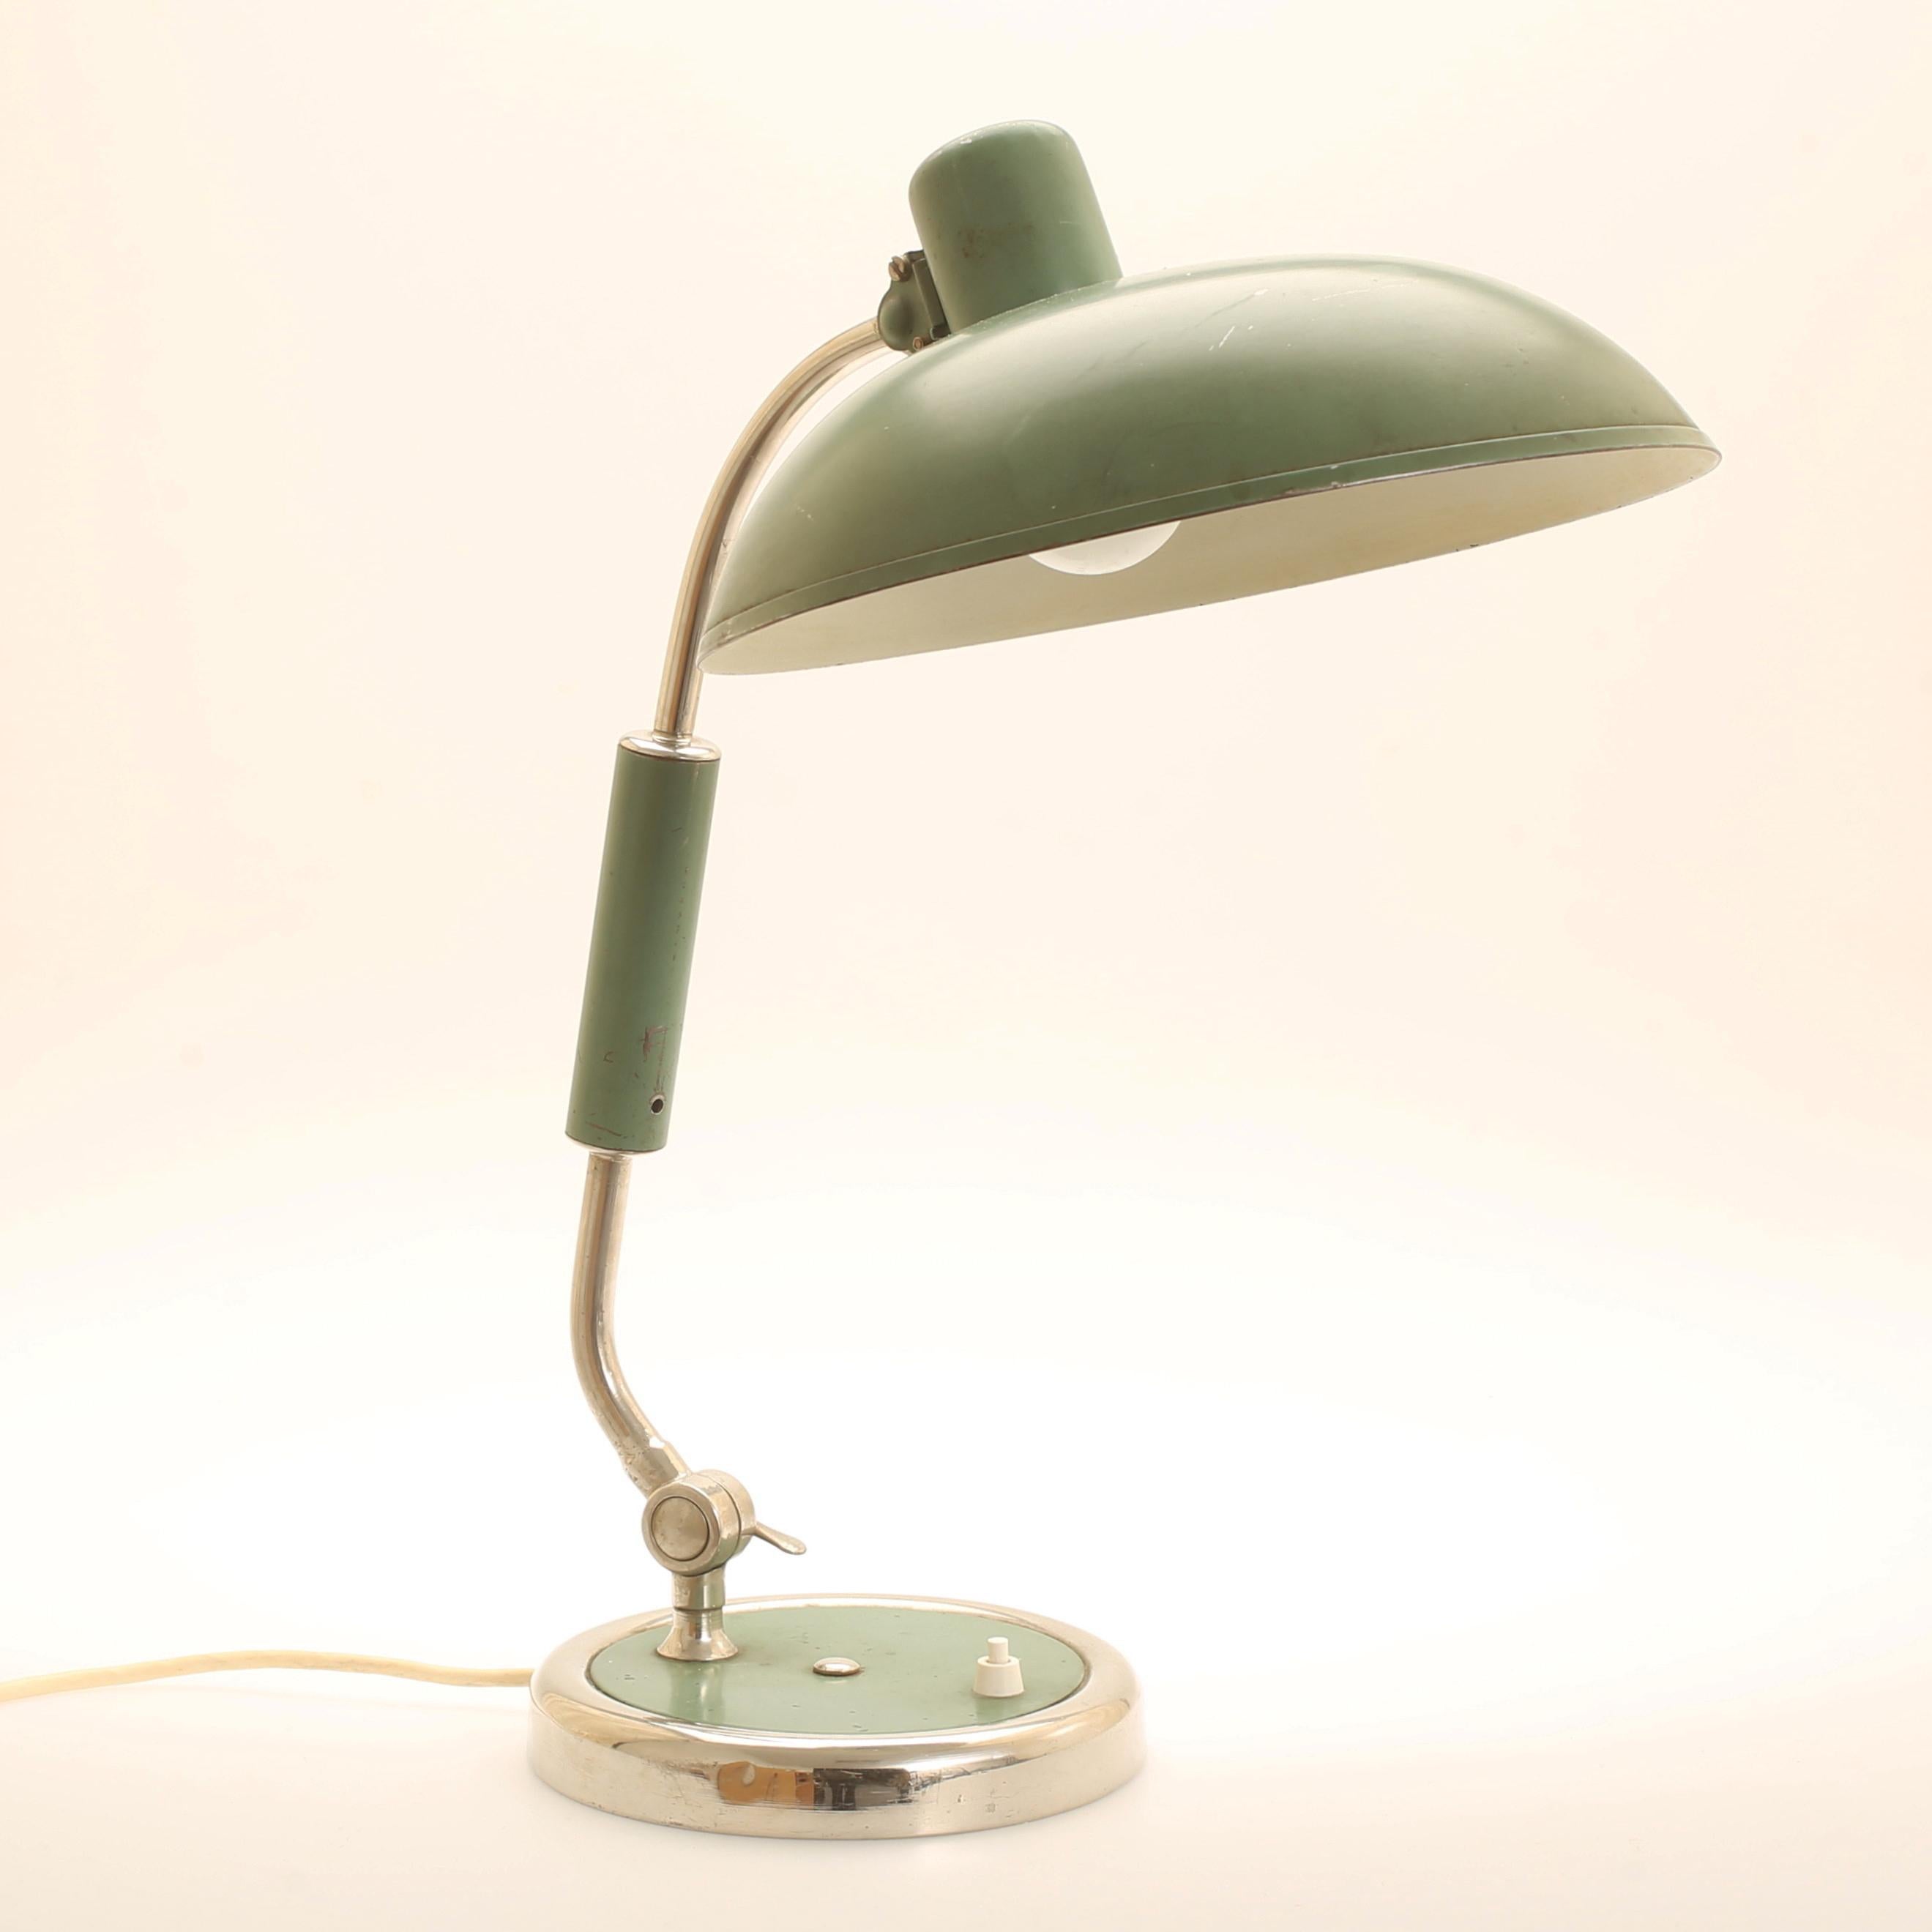 Bauhaus table lampe green laquered from the 1930s model 6632. Original condition
deivery time about 1-2 weeks